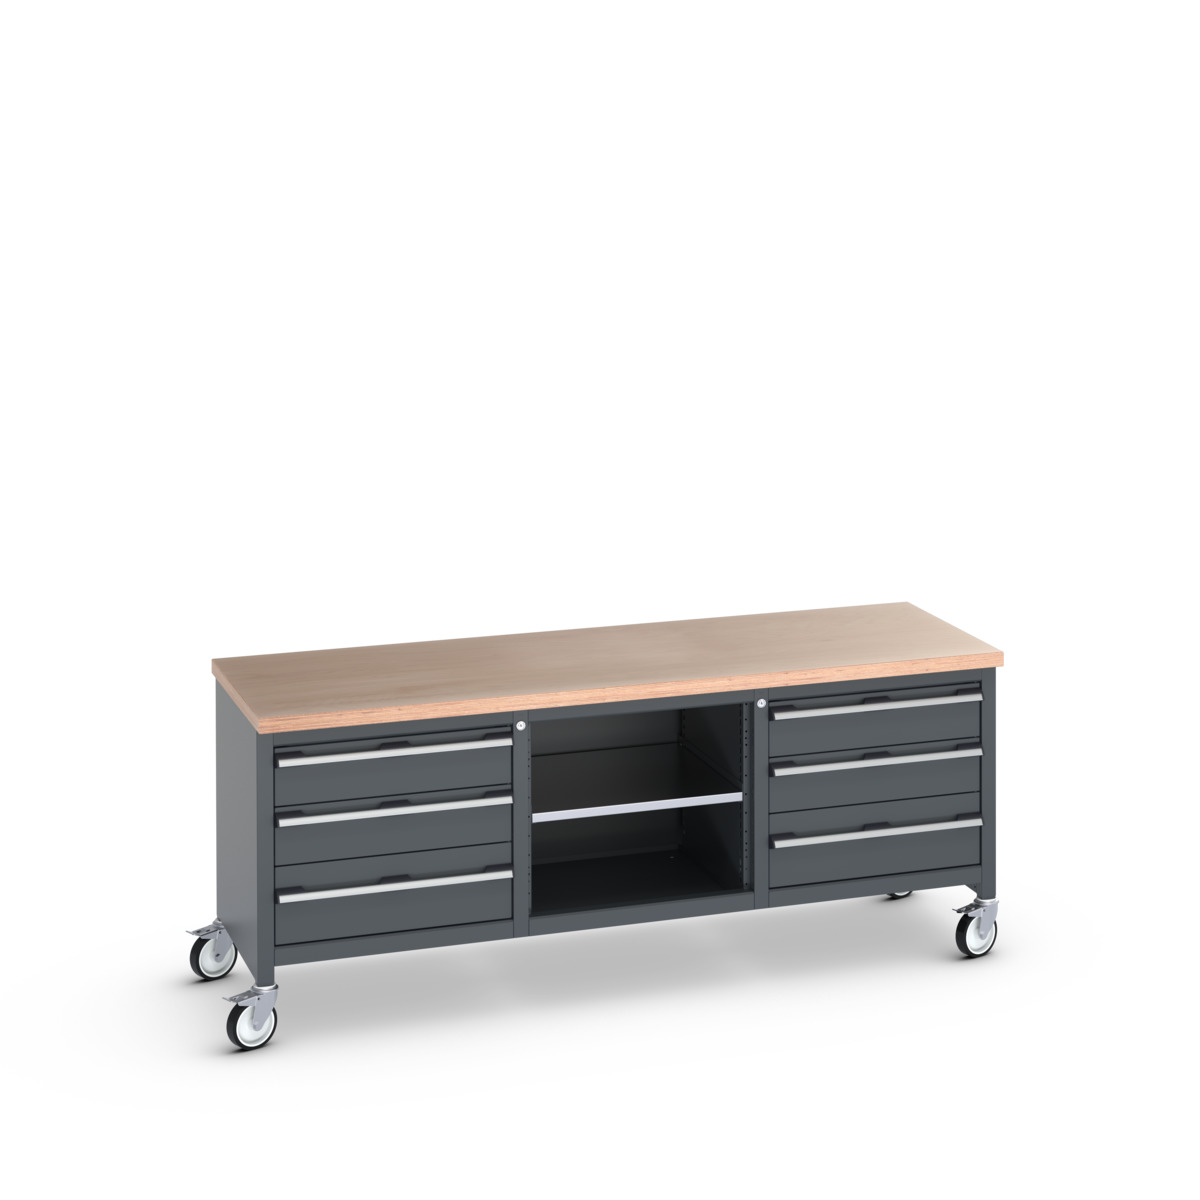 41002130.77V - cubio mobile storage bench (mpx)